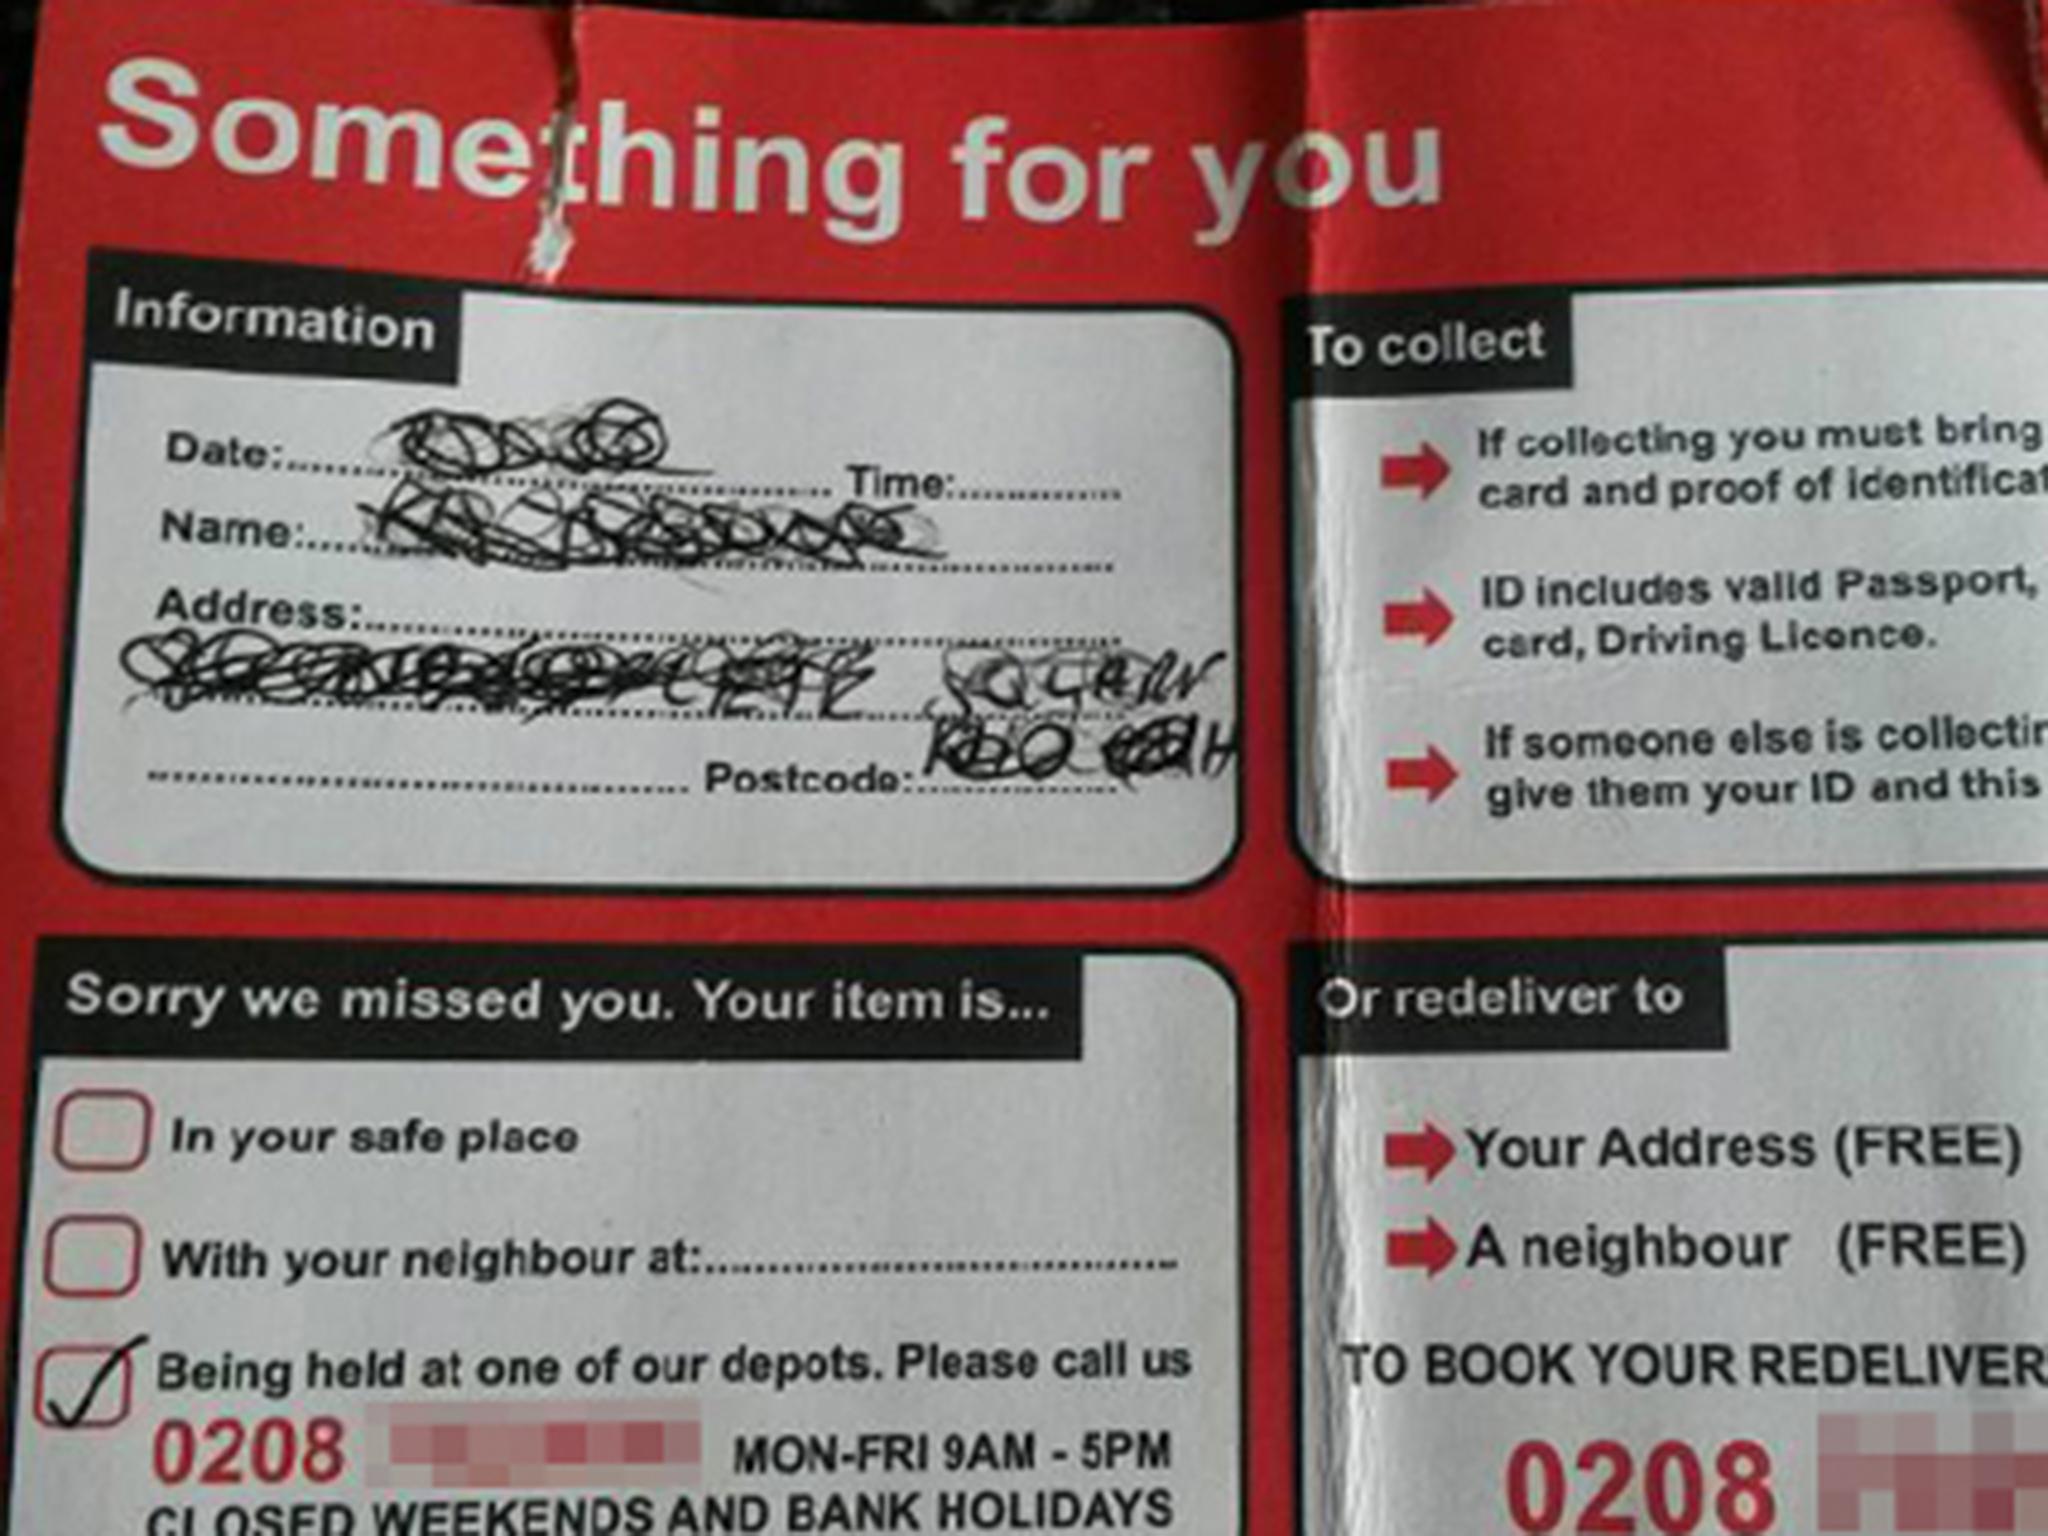 The "something for you" cards which are designed to look like they are from Royal Mail are a scam